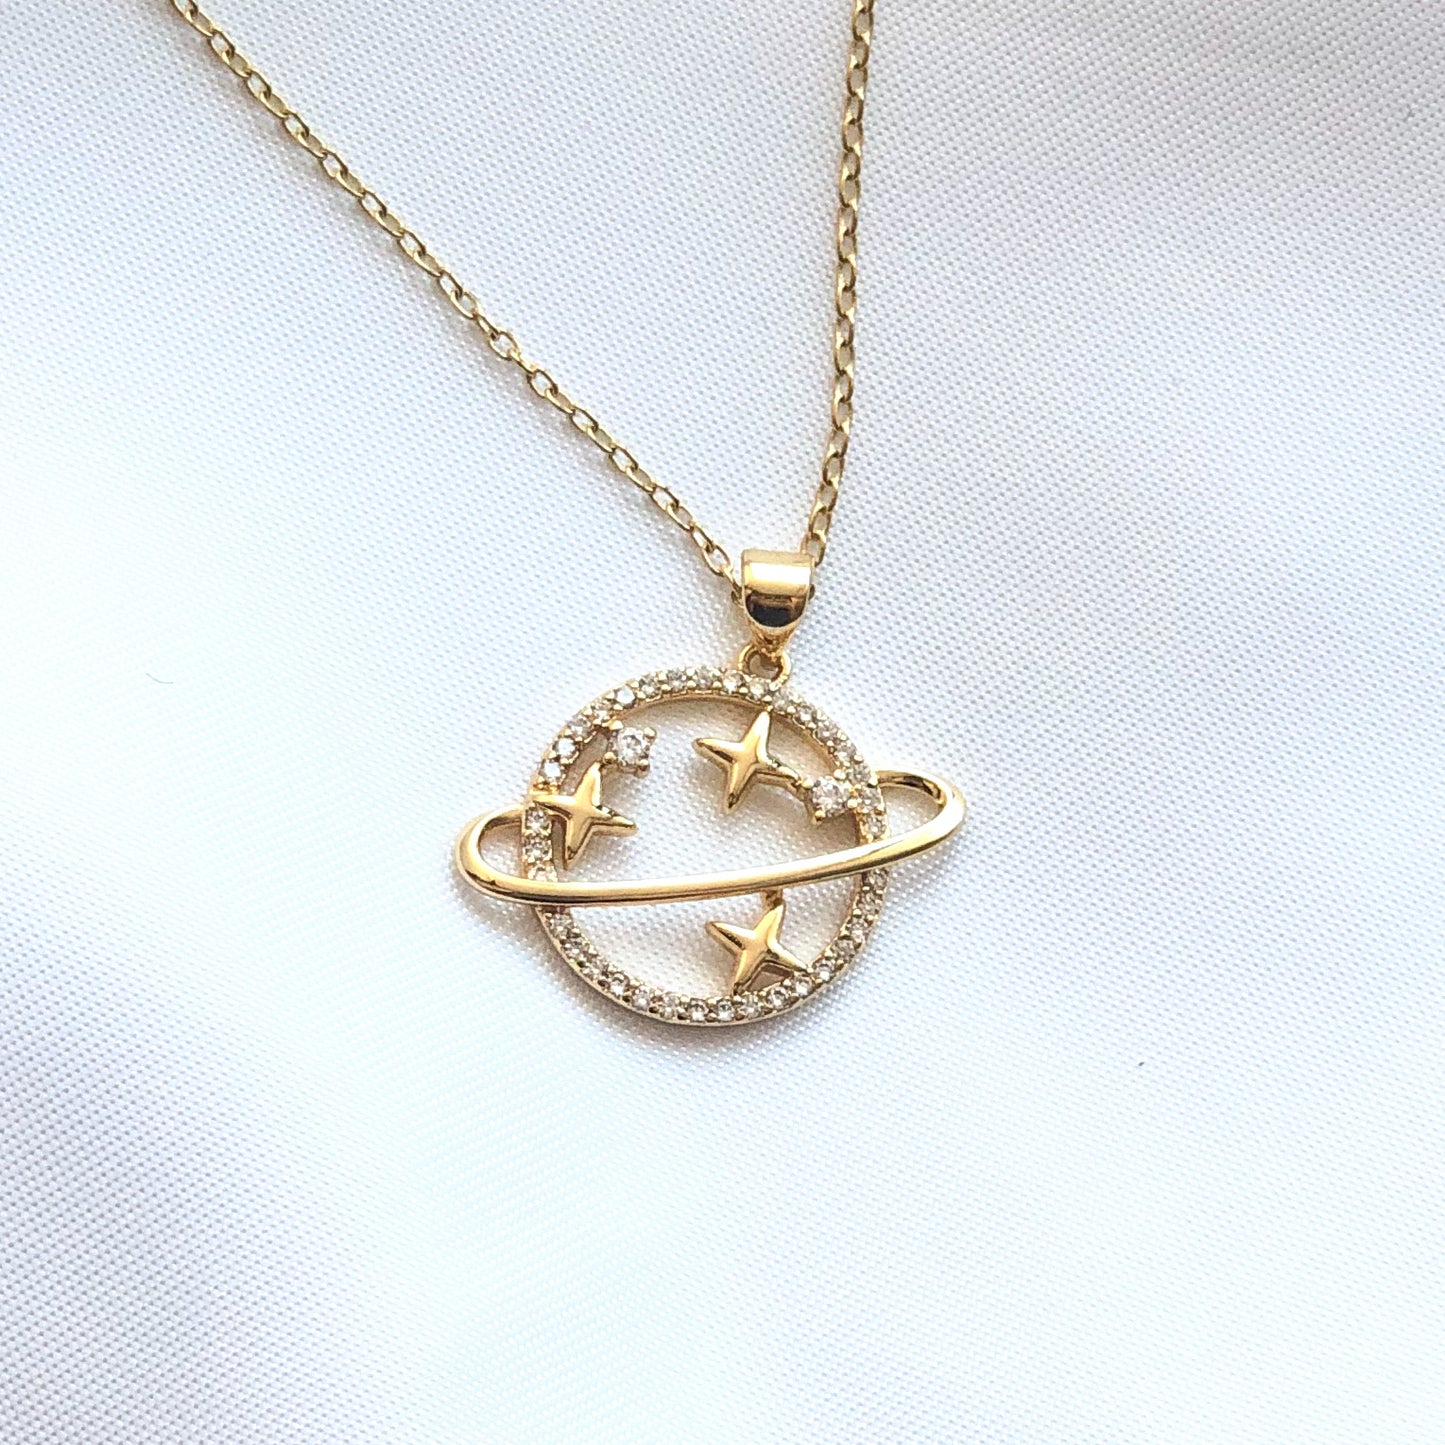 DAMARIS - Large Planet Saturn Necklace Gold Plated